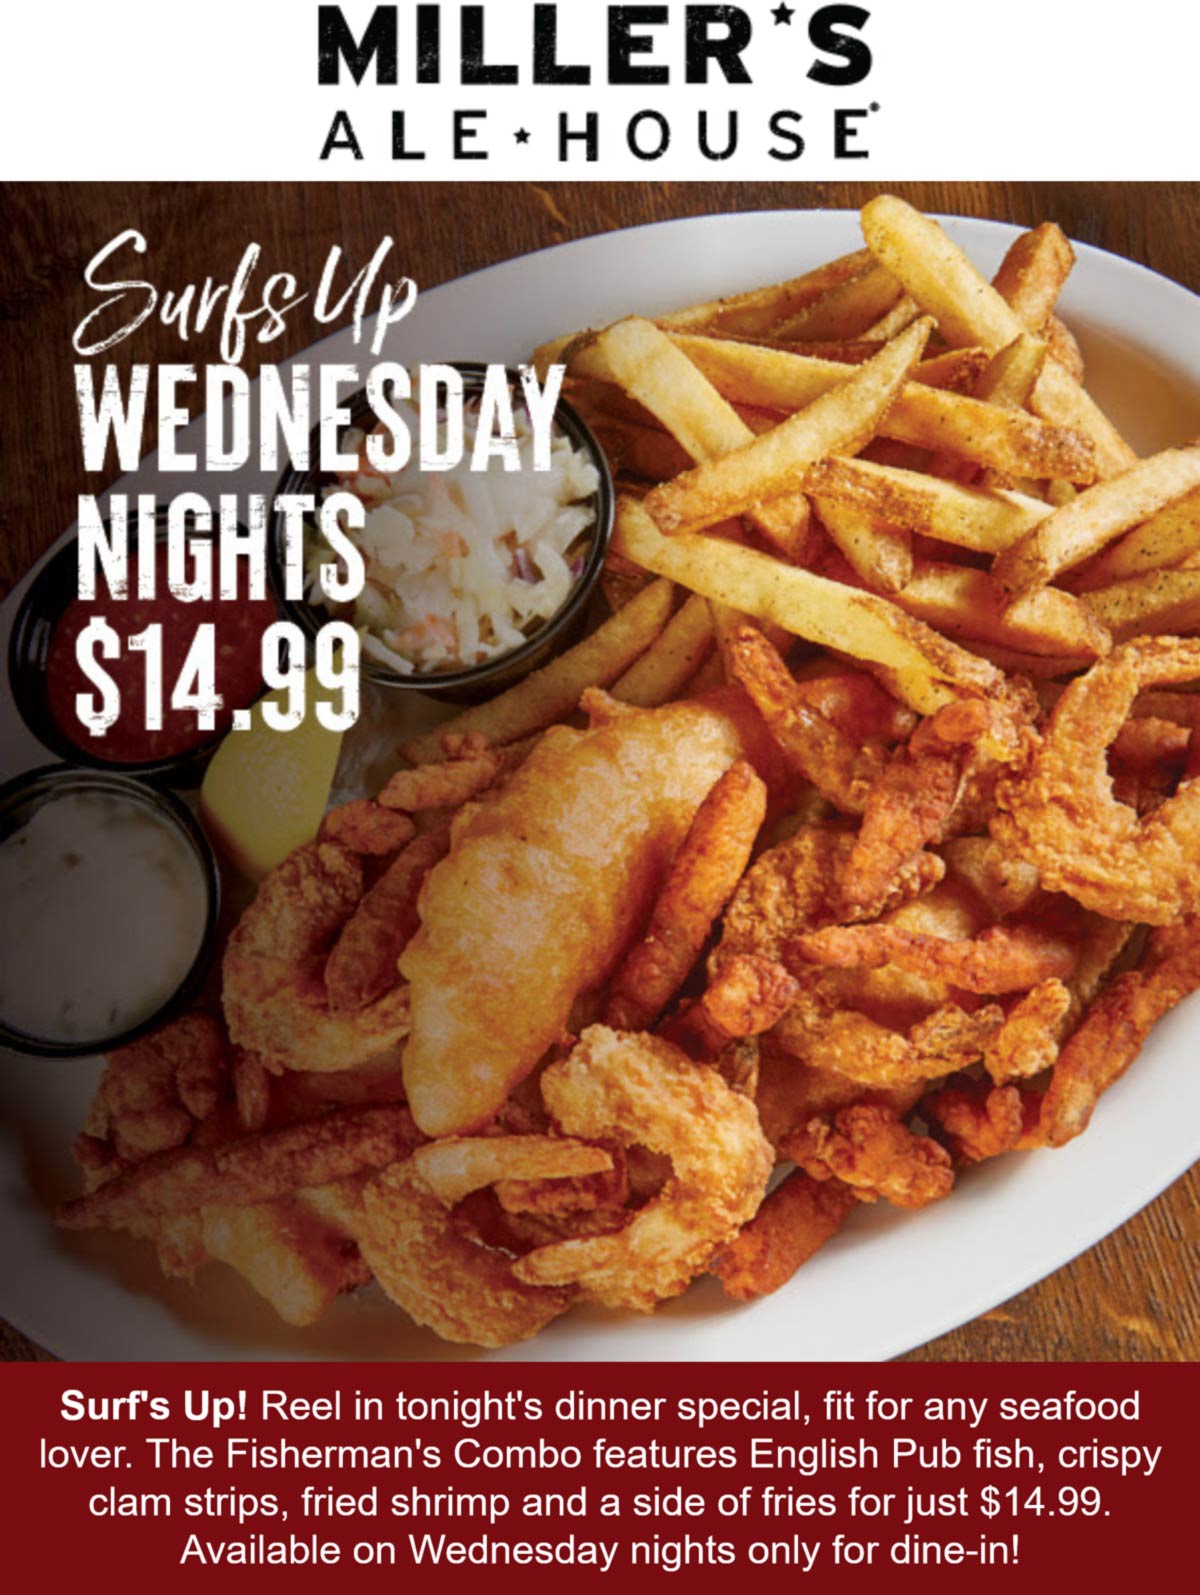 Millers Ale House restaurants Coupon  $15 fisherman combo meal today at Millers Ale House #millersalehouse 